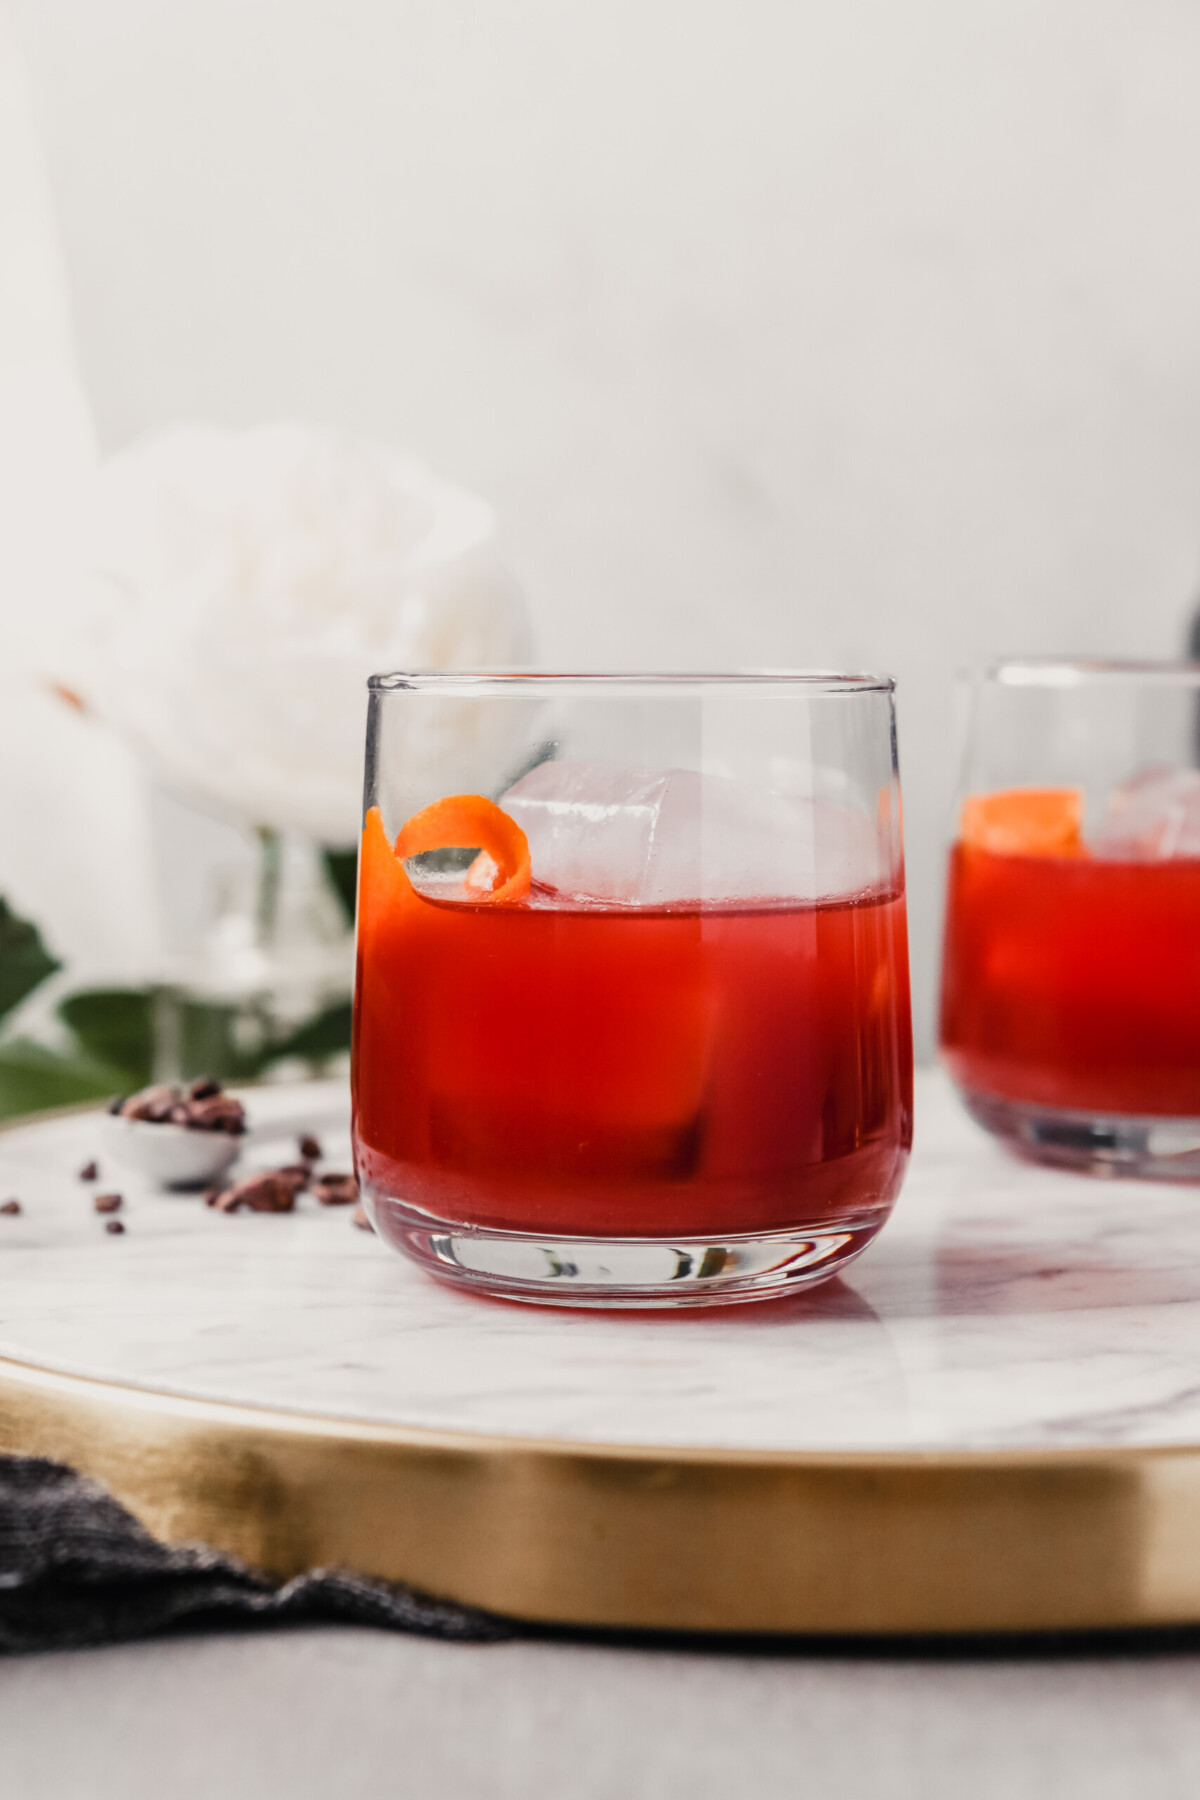 Photograph of a negroni cocktail in a rocks glass set on a white marble tray.